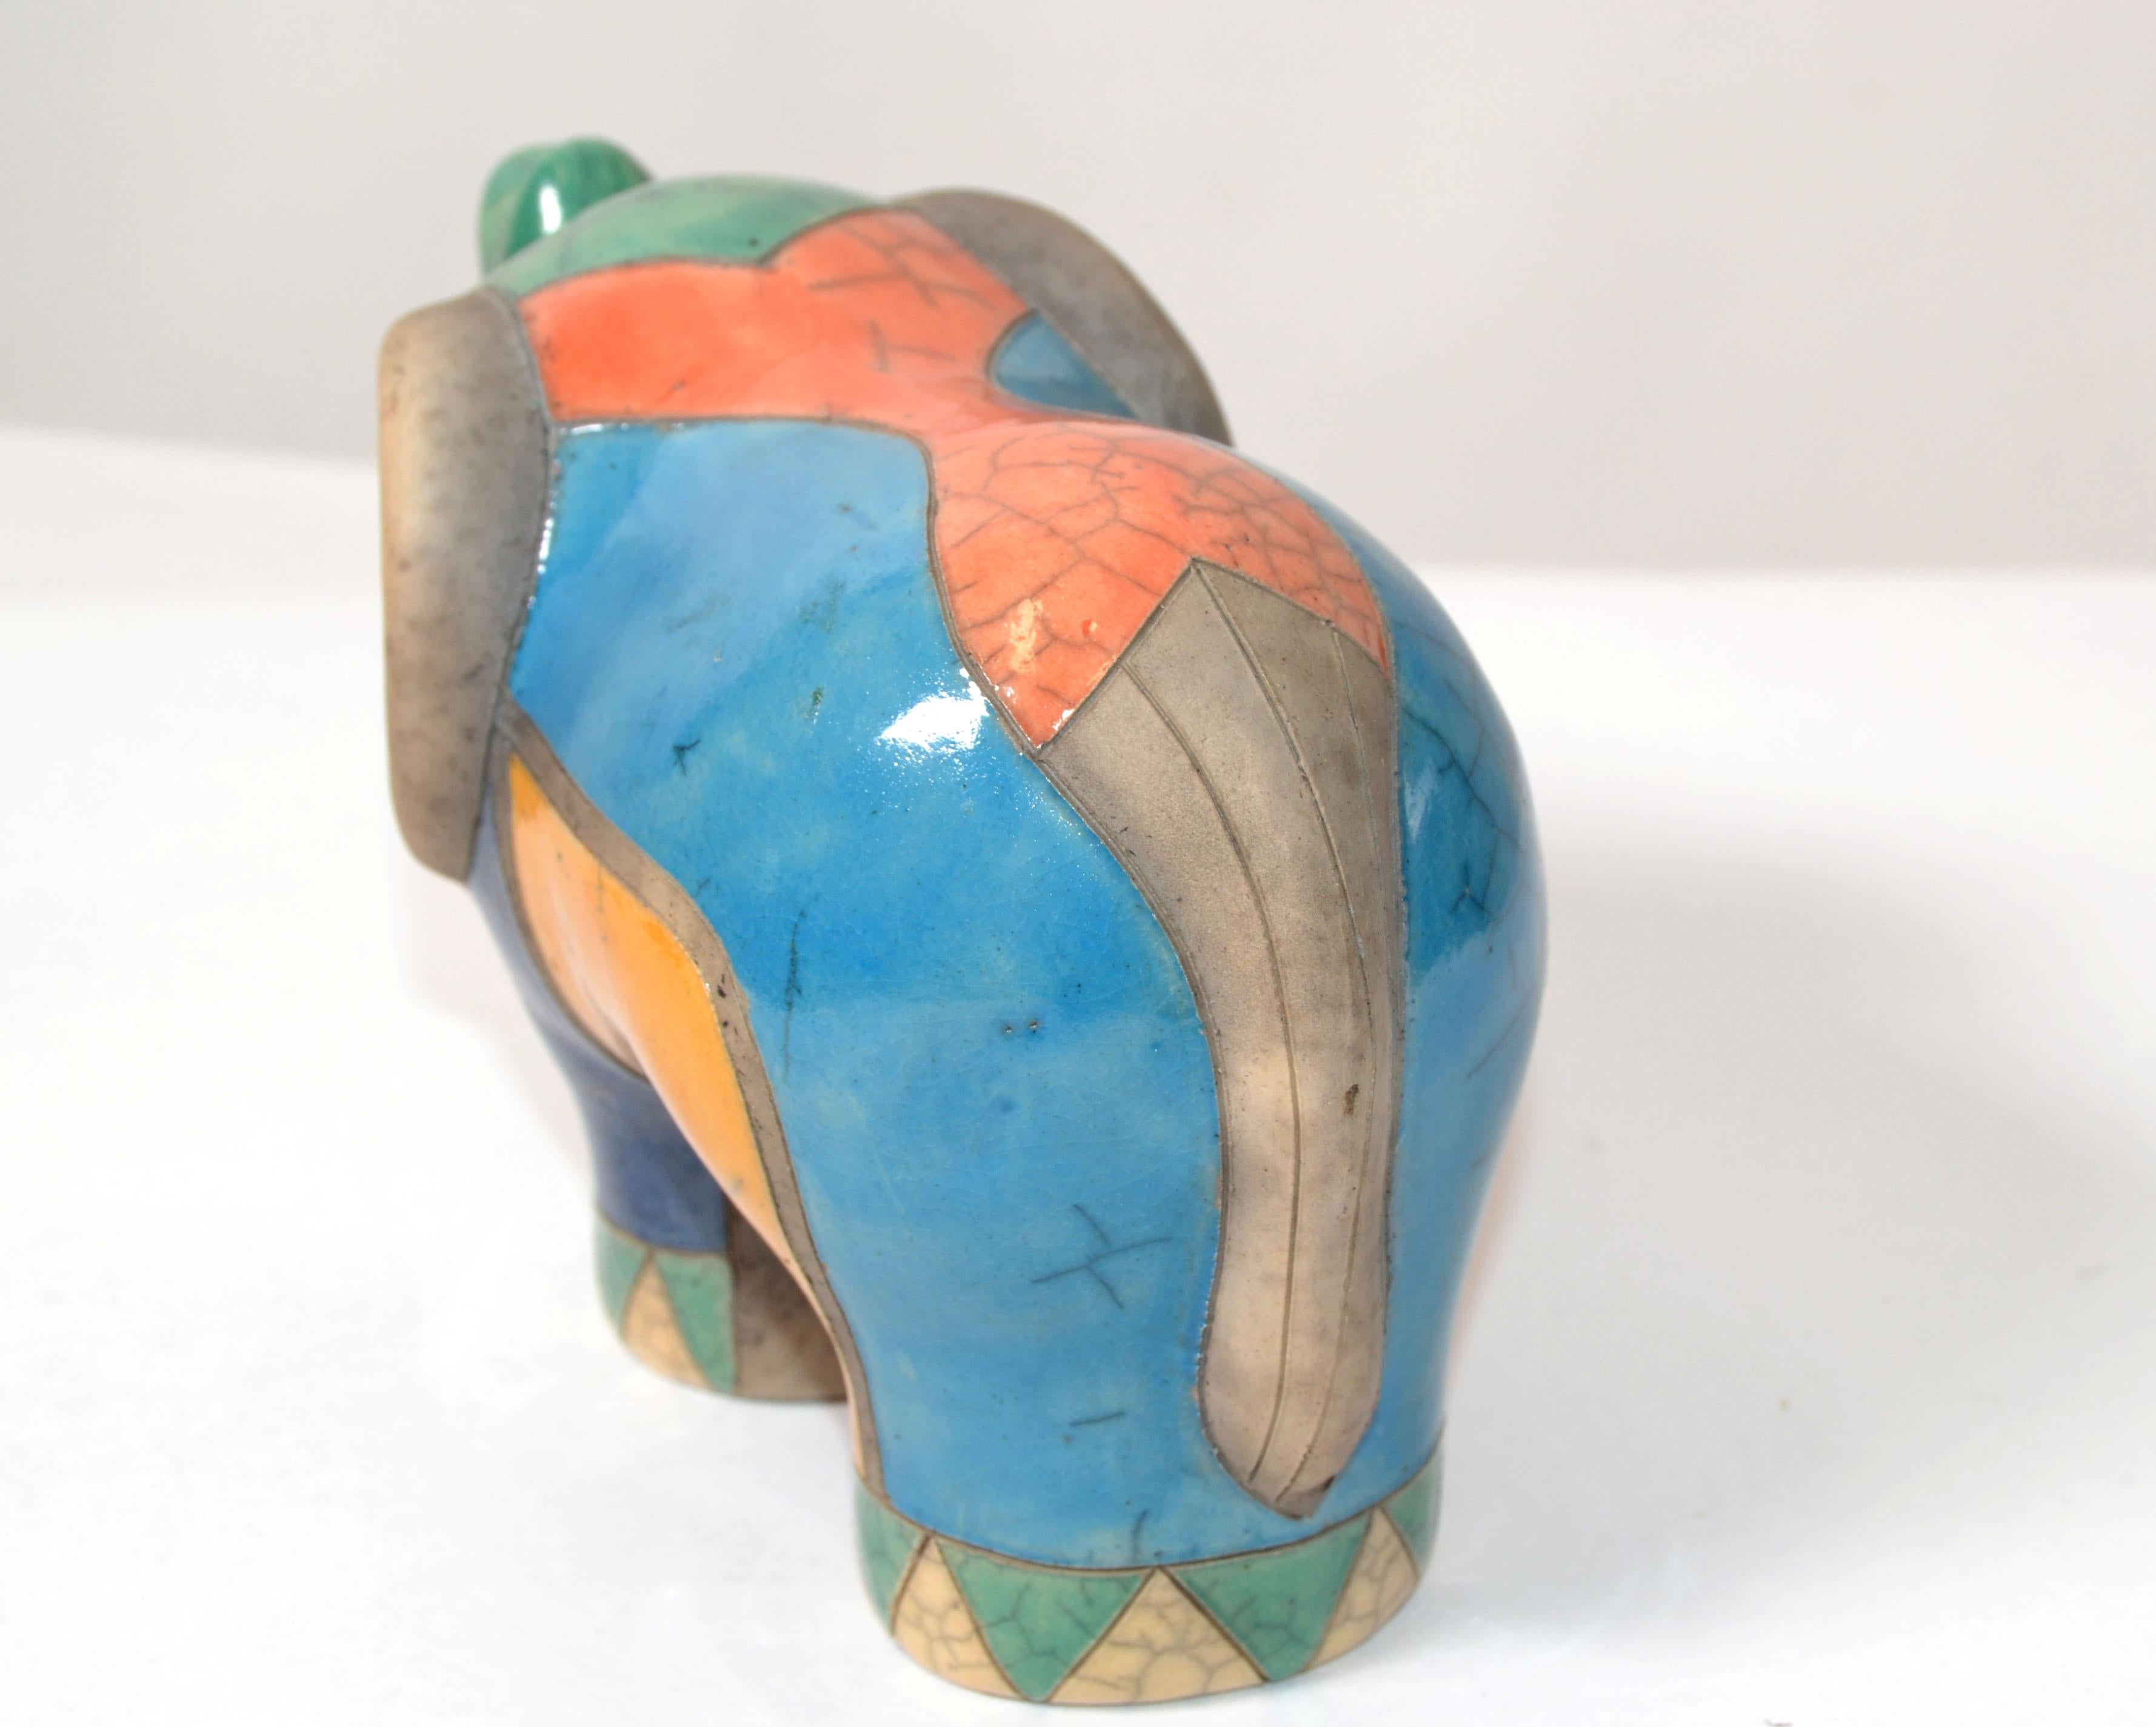 Luca CL Marked Colorful Ceramic Elephant Sculpture Mid-Century Modern Italy 1970 For Sale 3